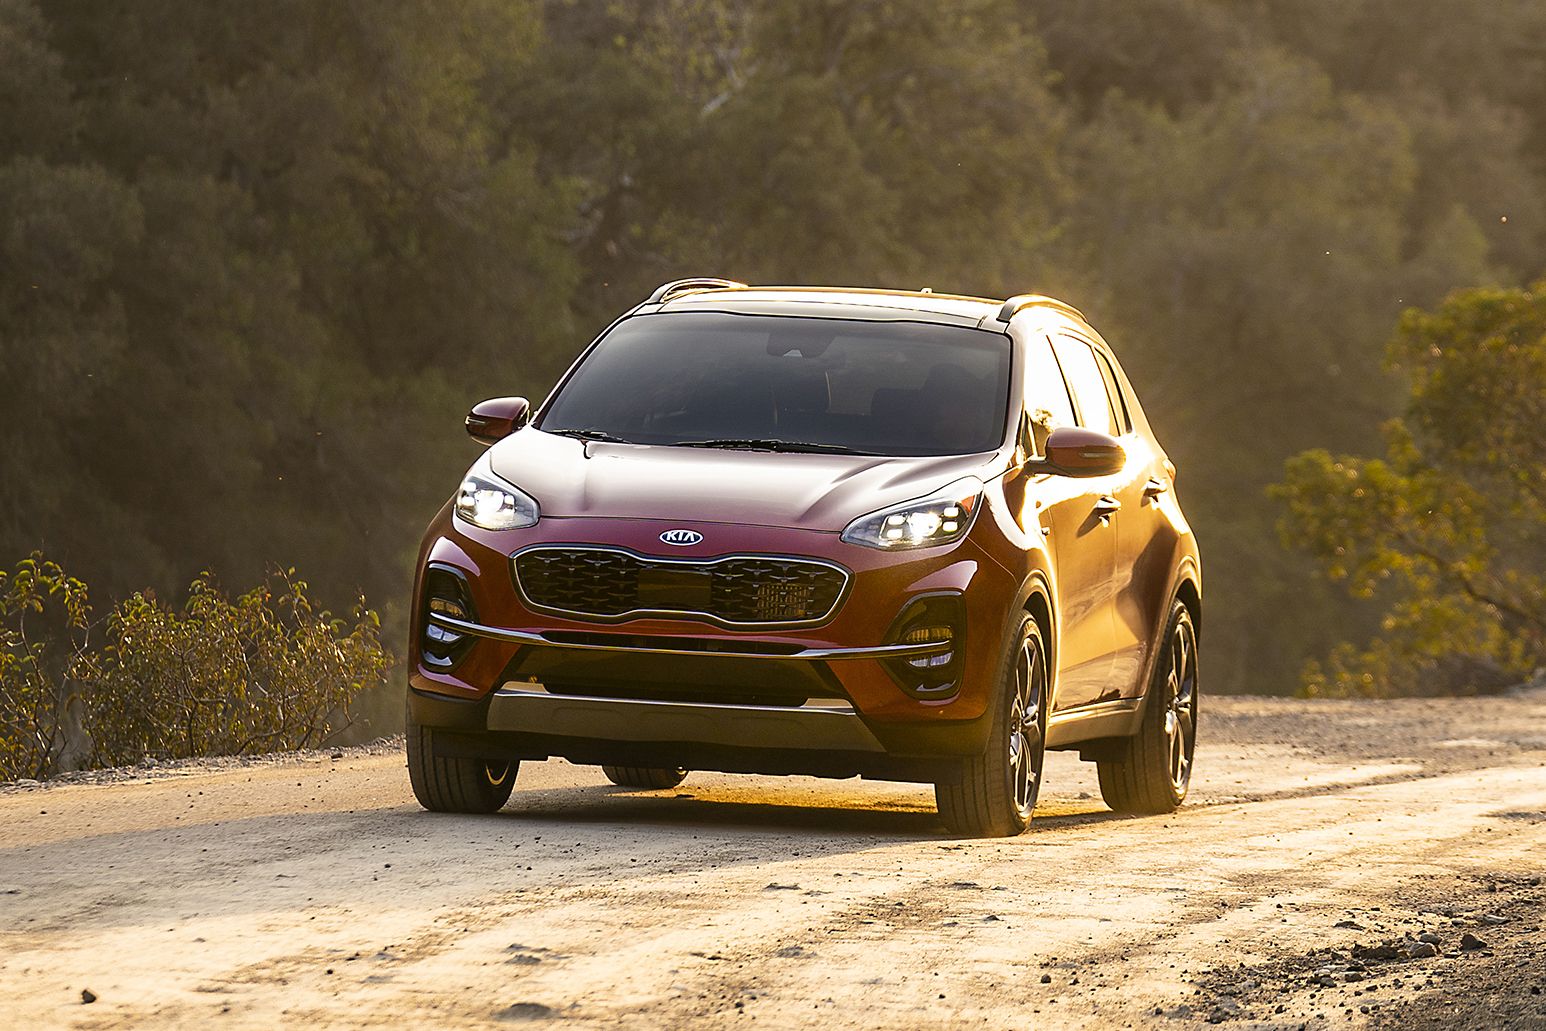 Review: The 2022 Kia Sportage Hybrid lives up to its high price